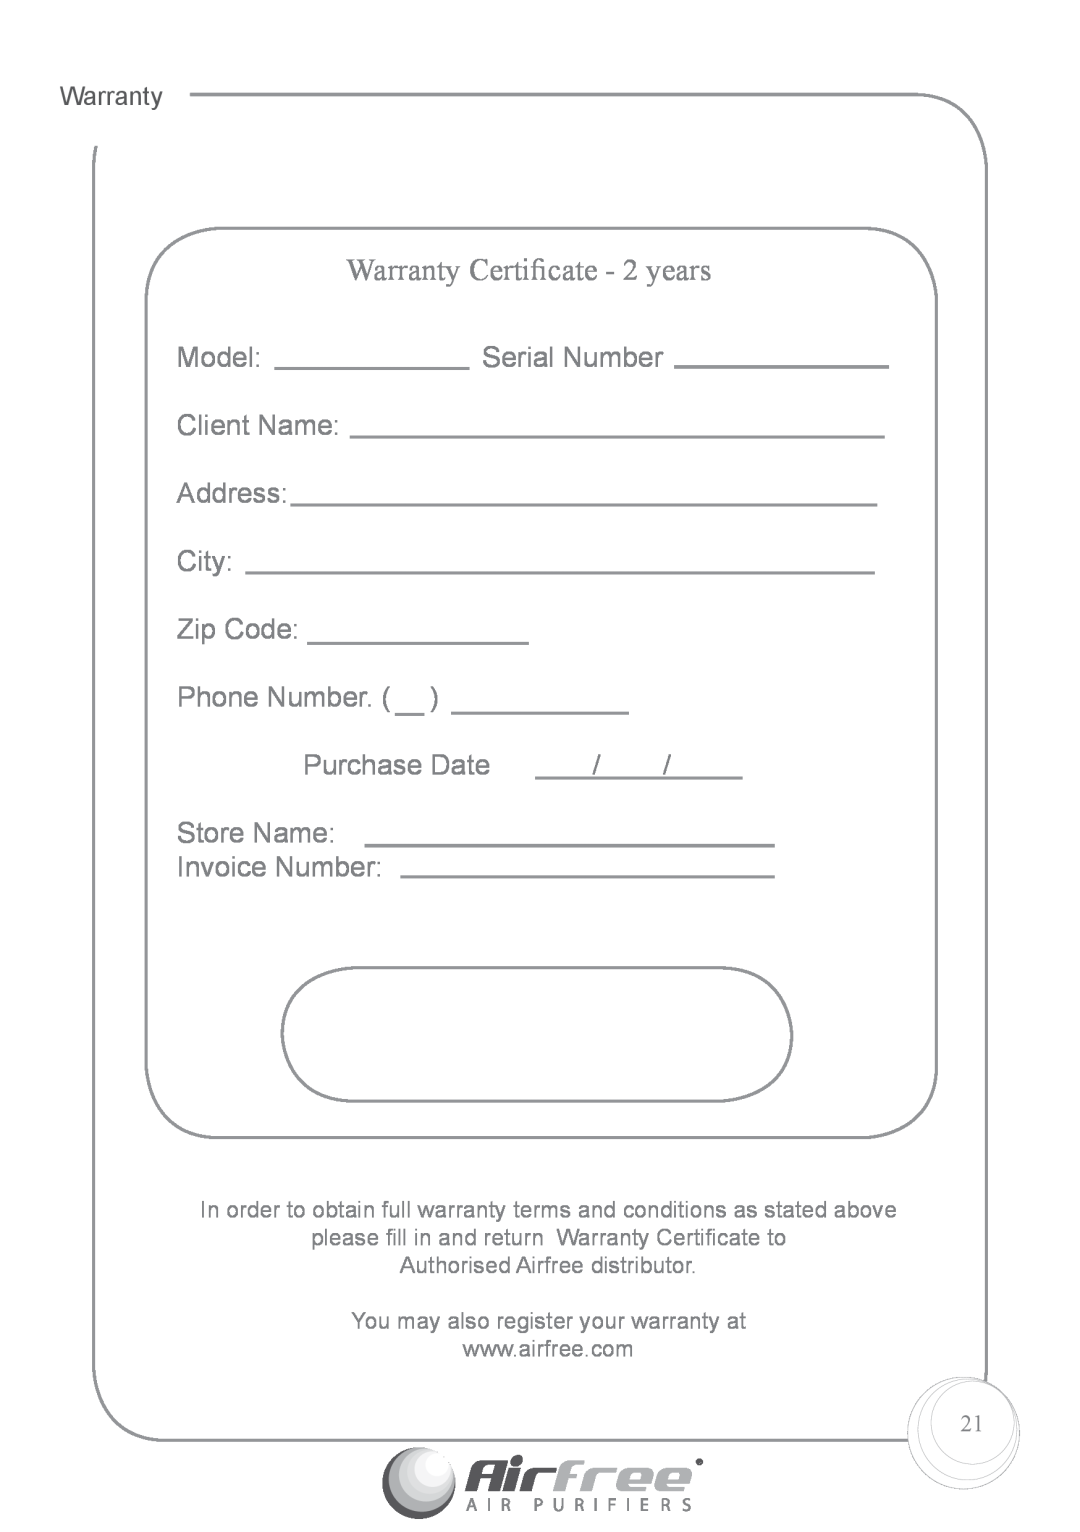 Airfree p1000 Warranty Certiﬁcate - 2 years, Model, Serial Number, Client Name Address City, Zip Code, Phone Number 